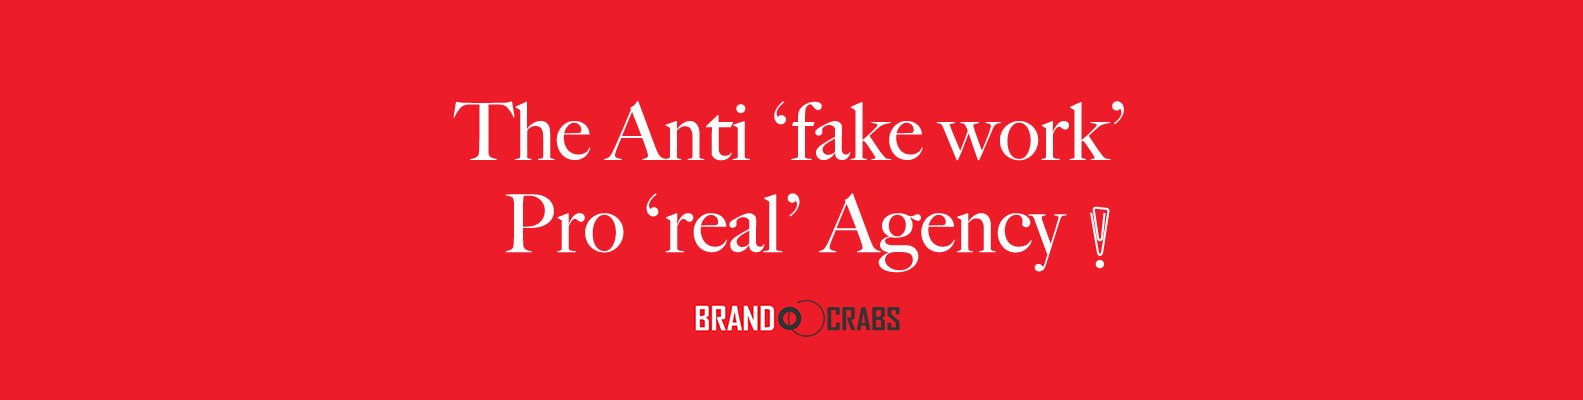 EFFECTIVE CREATIVE AD AGENCIES – TRAITS & MUST-HAVES Banner